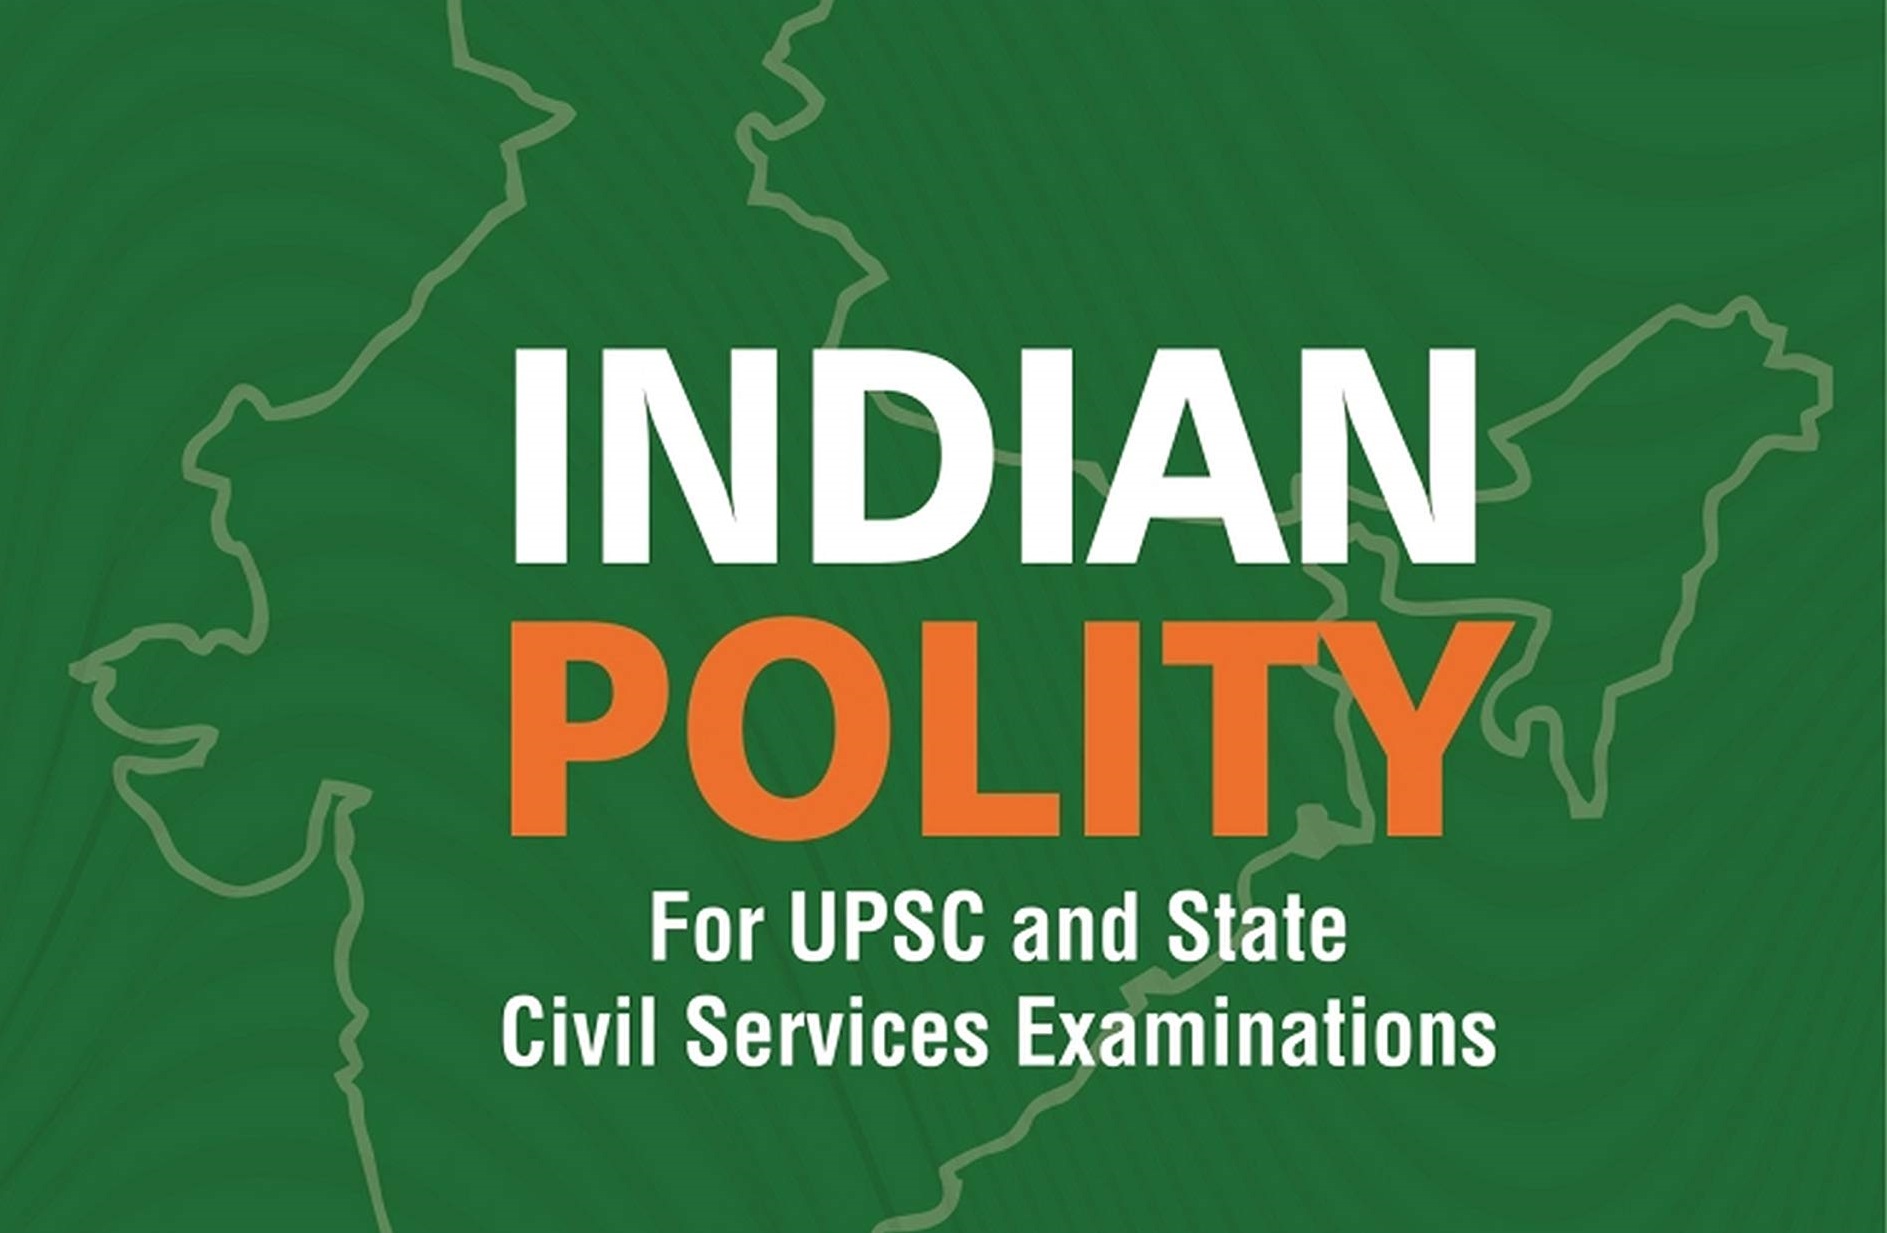 Indian Polity notes for UPSC IAS download book pdf